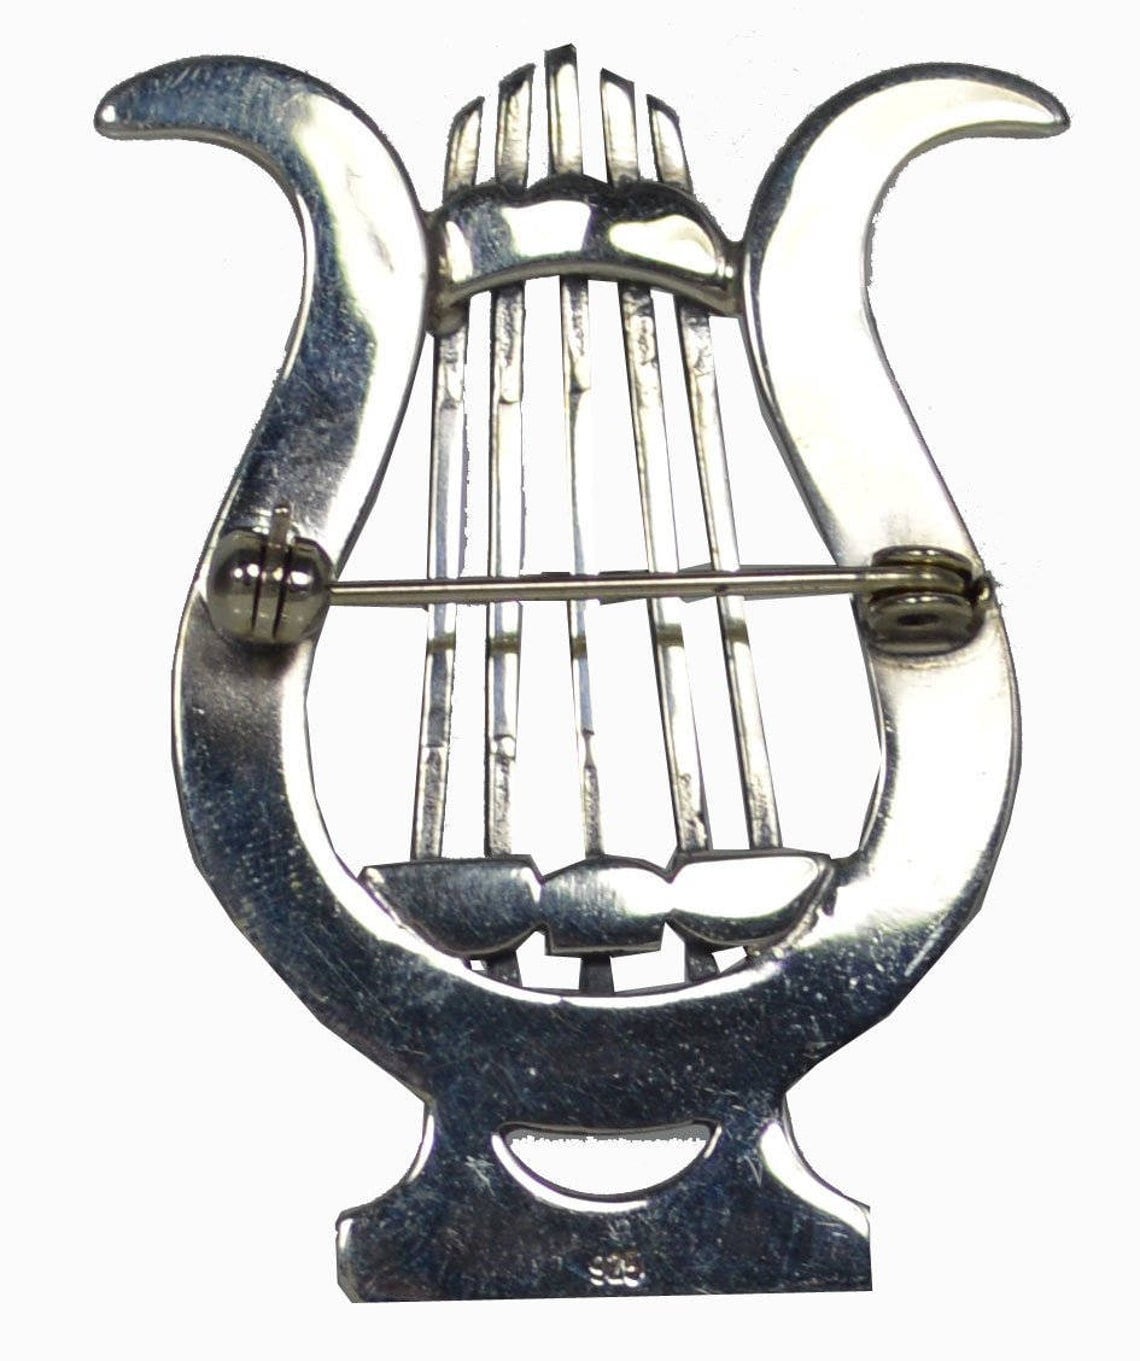 Apollo's Lyre - Musical Instrument invented by Hermes and given to Apollo as a gift - Ancient Greece - Brooch Pin - 925 Sterling Silver